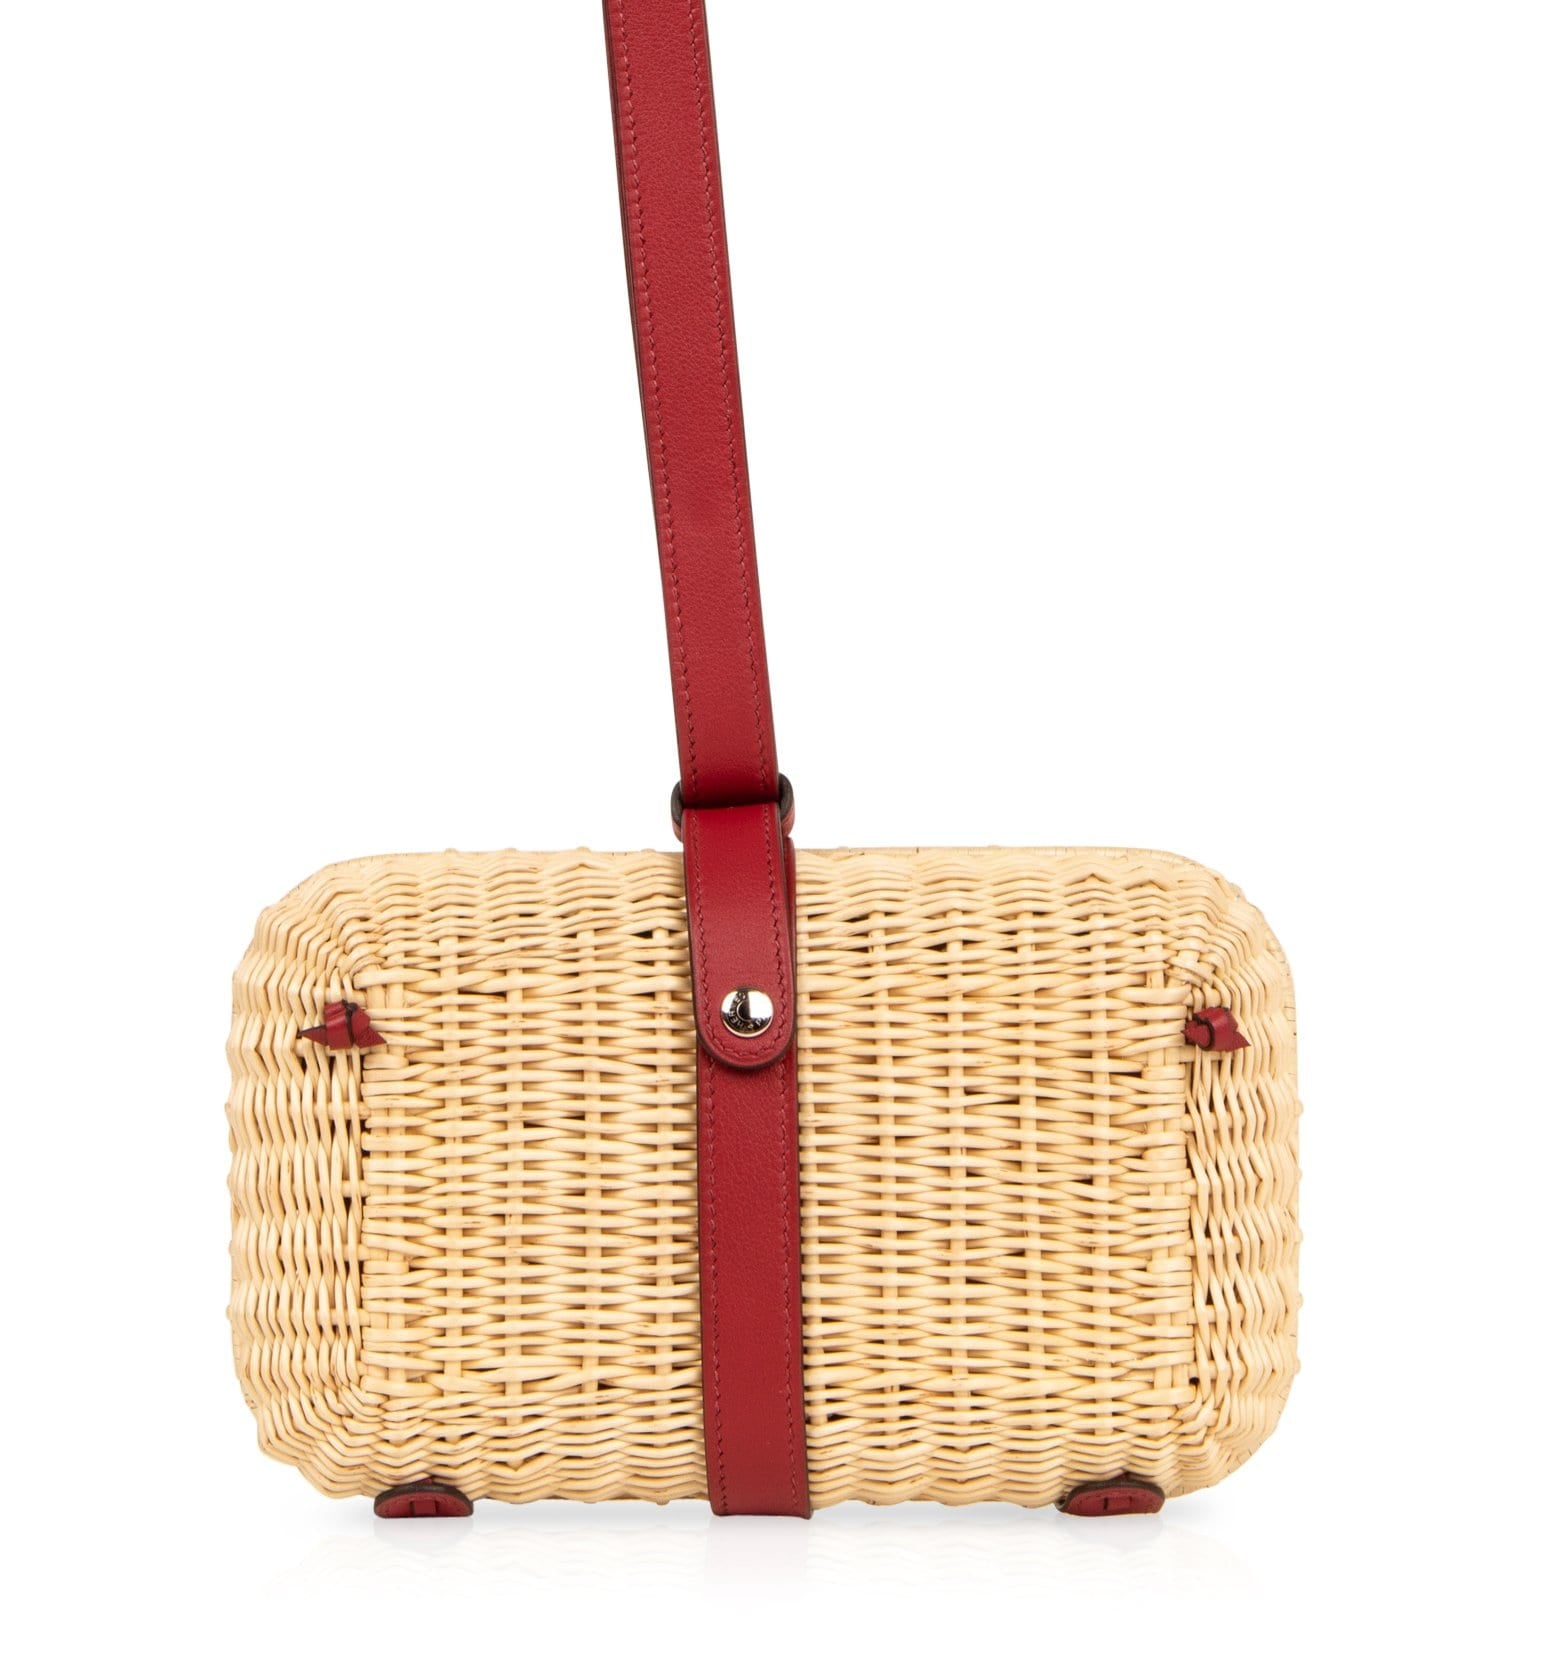 A LIMITED EDITION ROUGE SELLIER SWIFT LEATHER & OSIER PICNIC